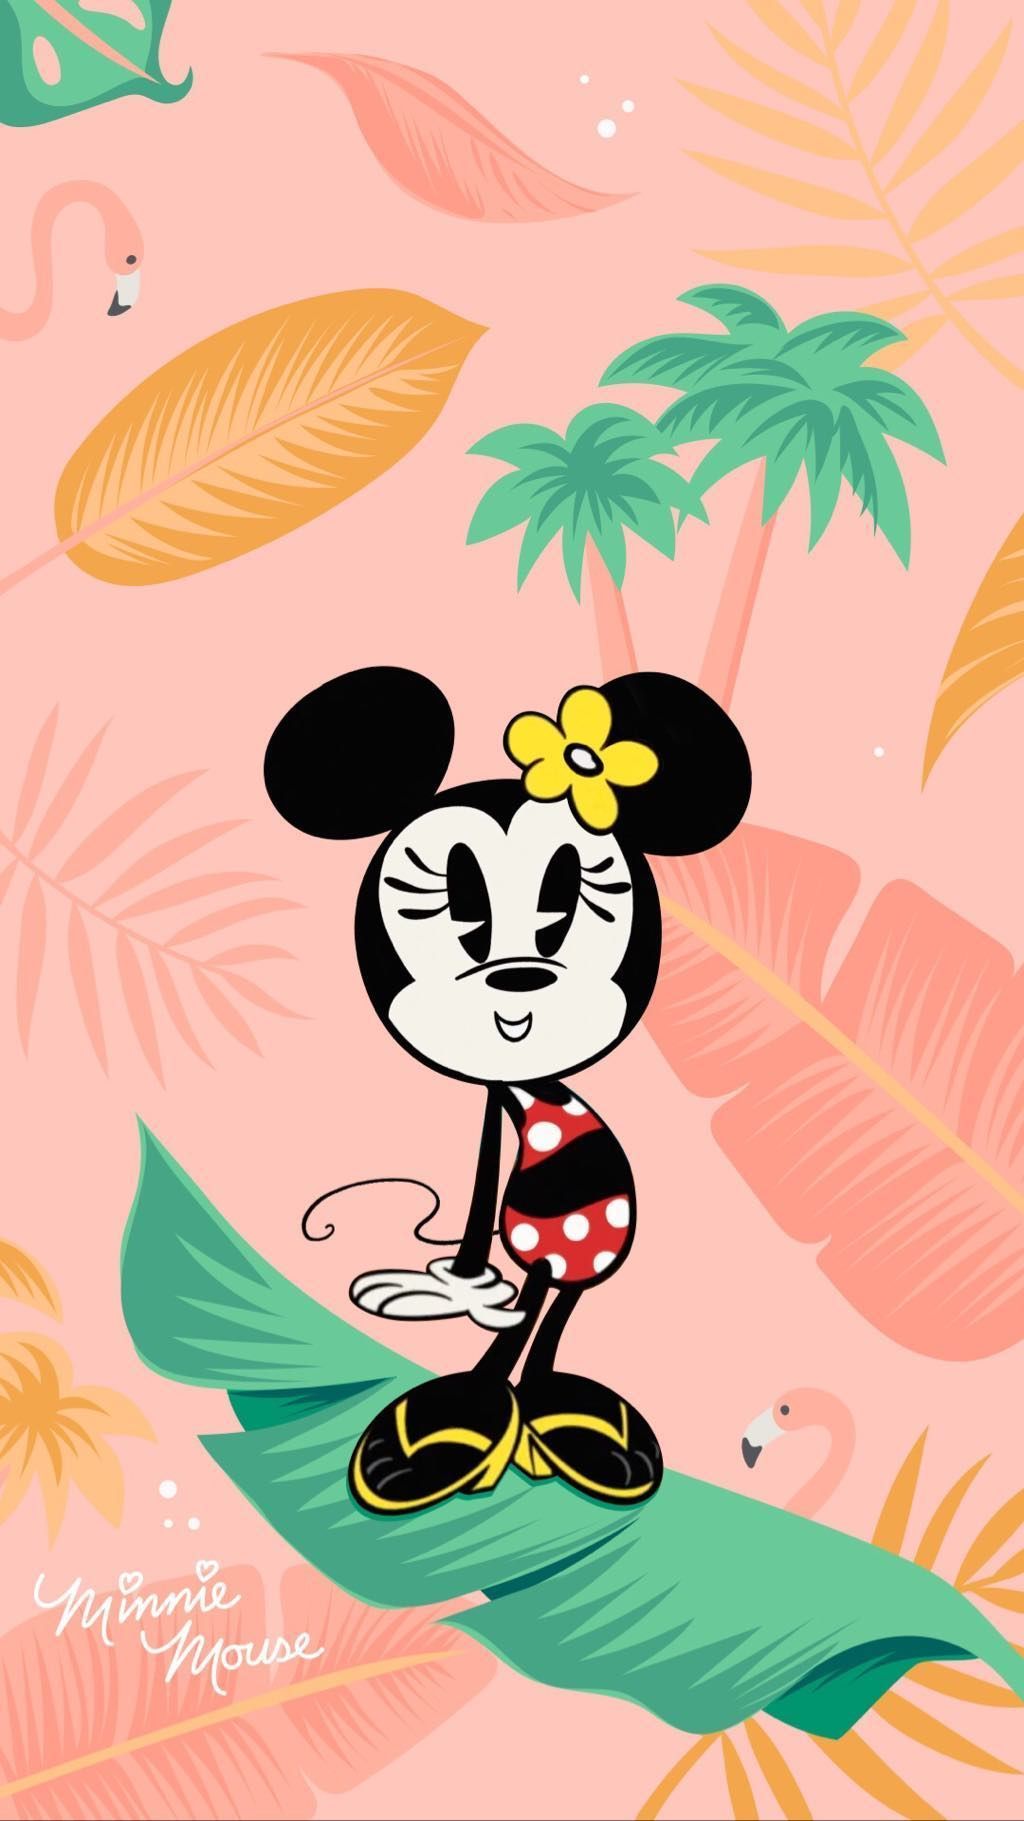 Instagram. Mickey mouse cartoon, Mickey mouse art, Mickey mouse wallpaper